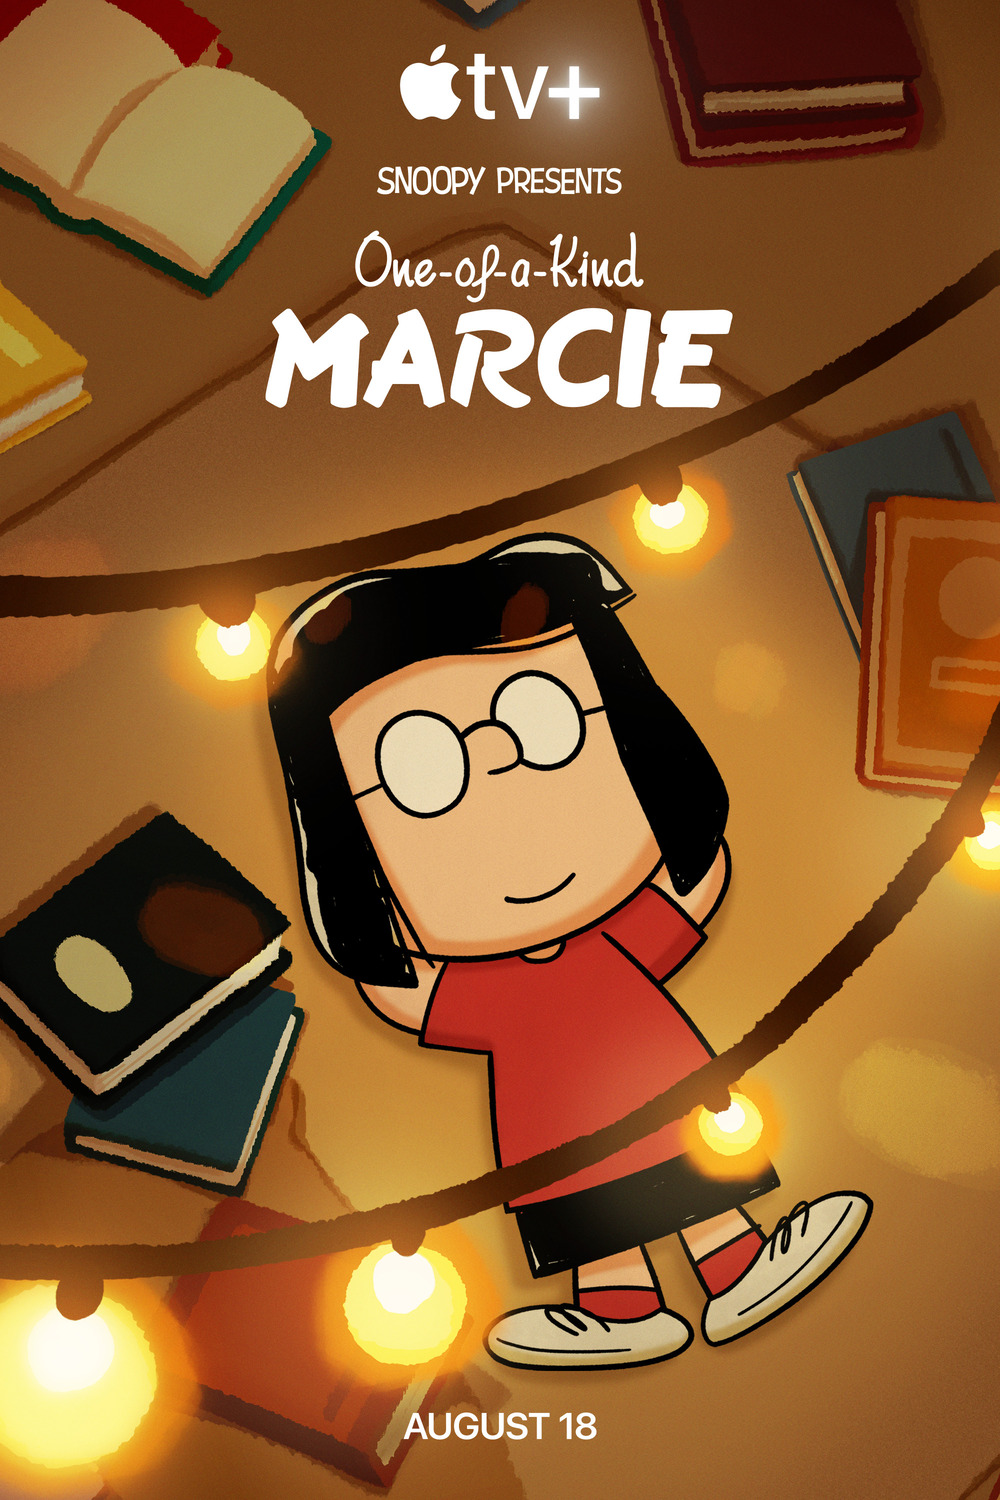 Extra Large TV Poster Image for Snoopy Presents: One-of-a-Kind Marcie 